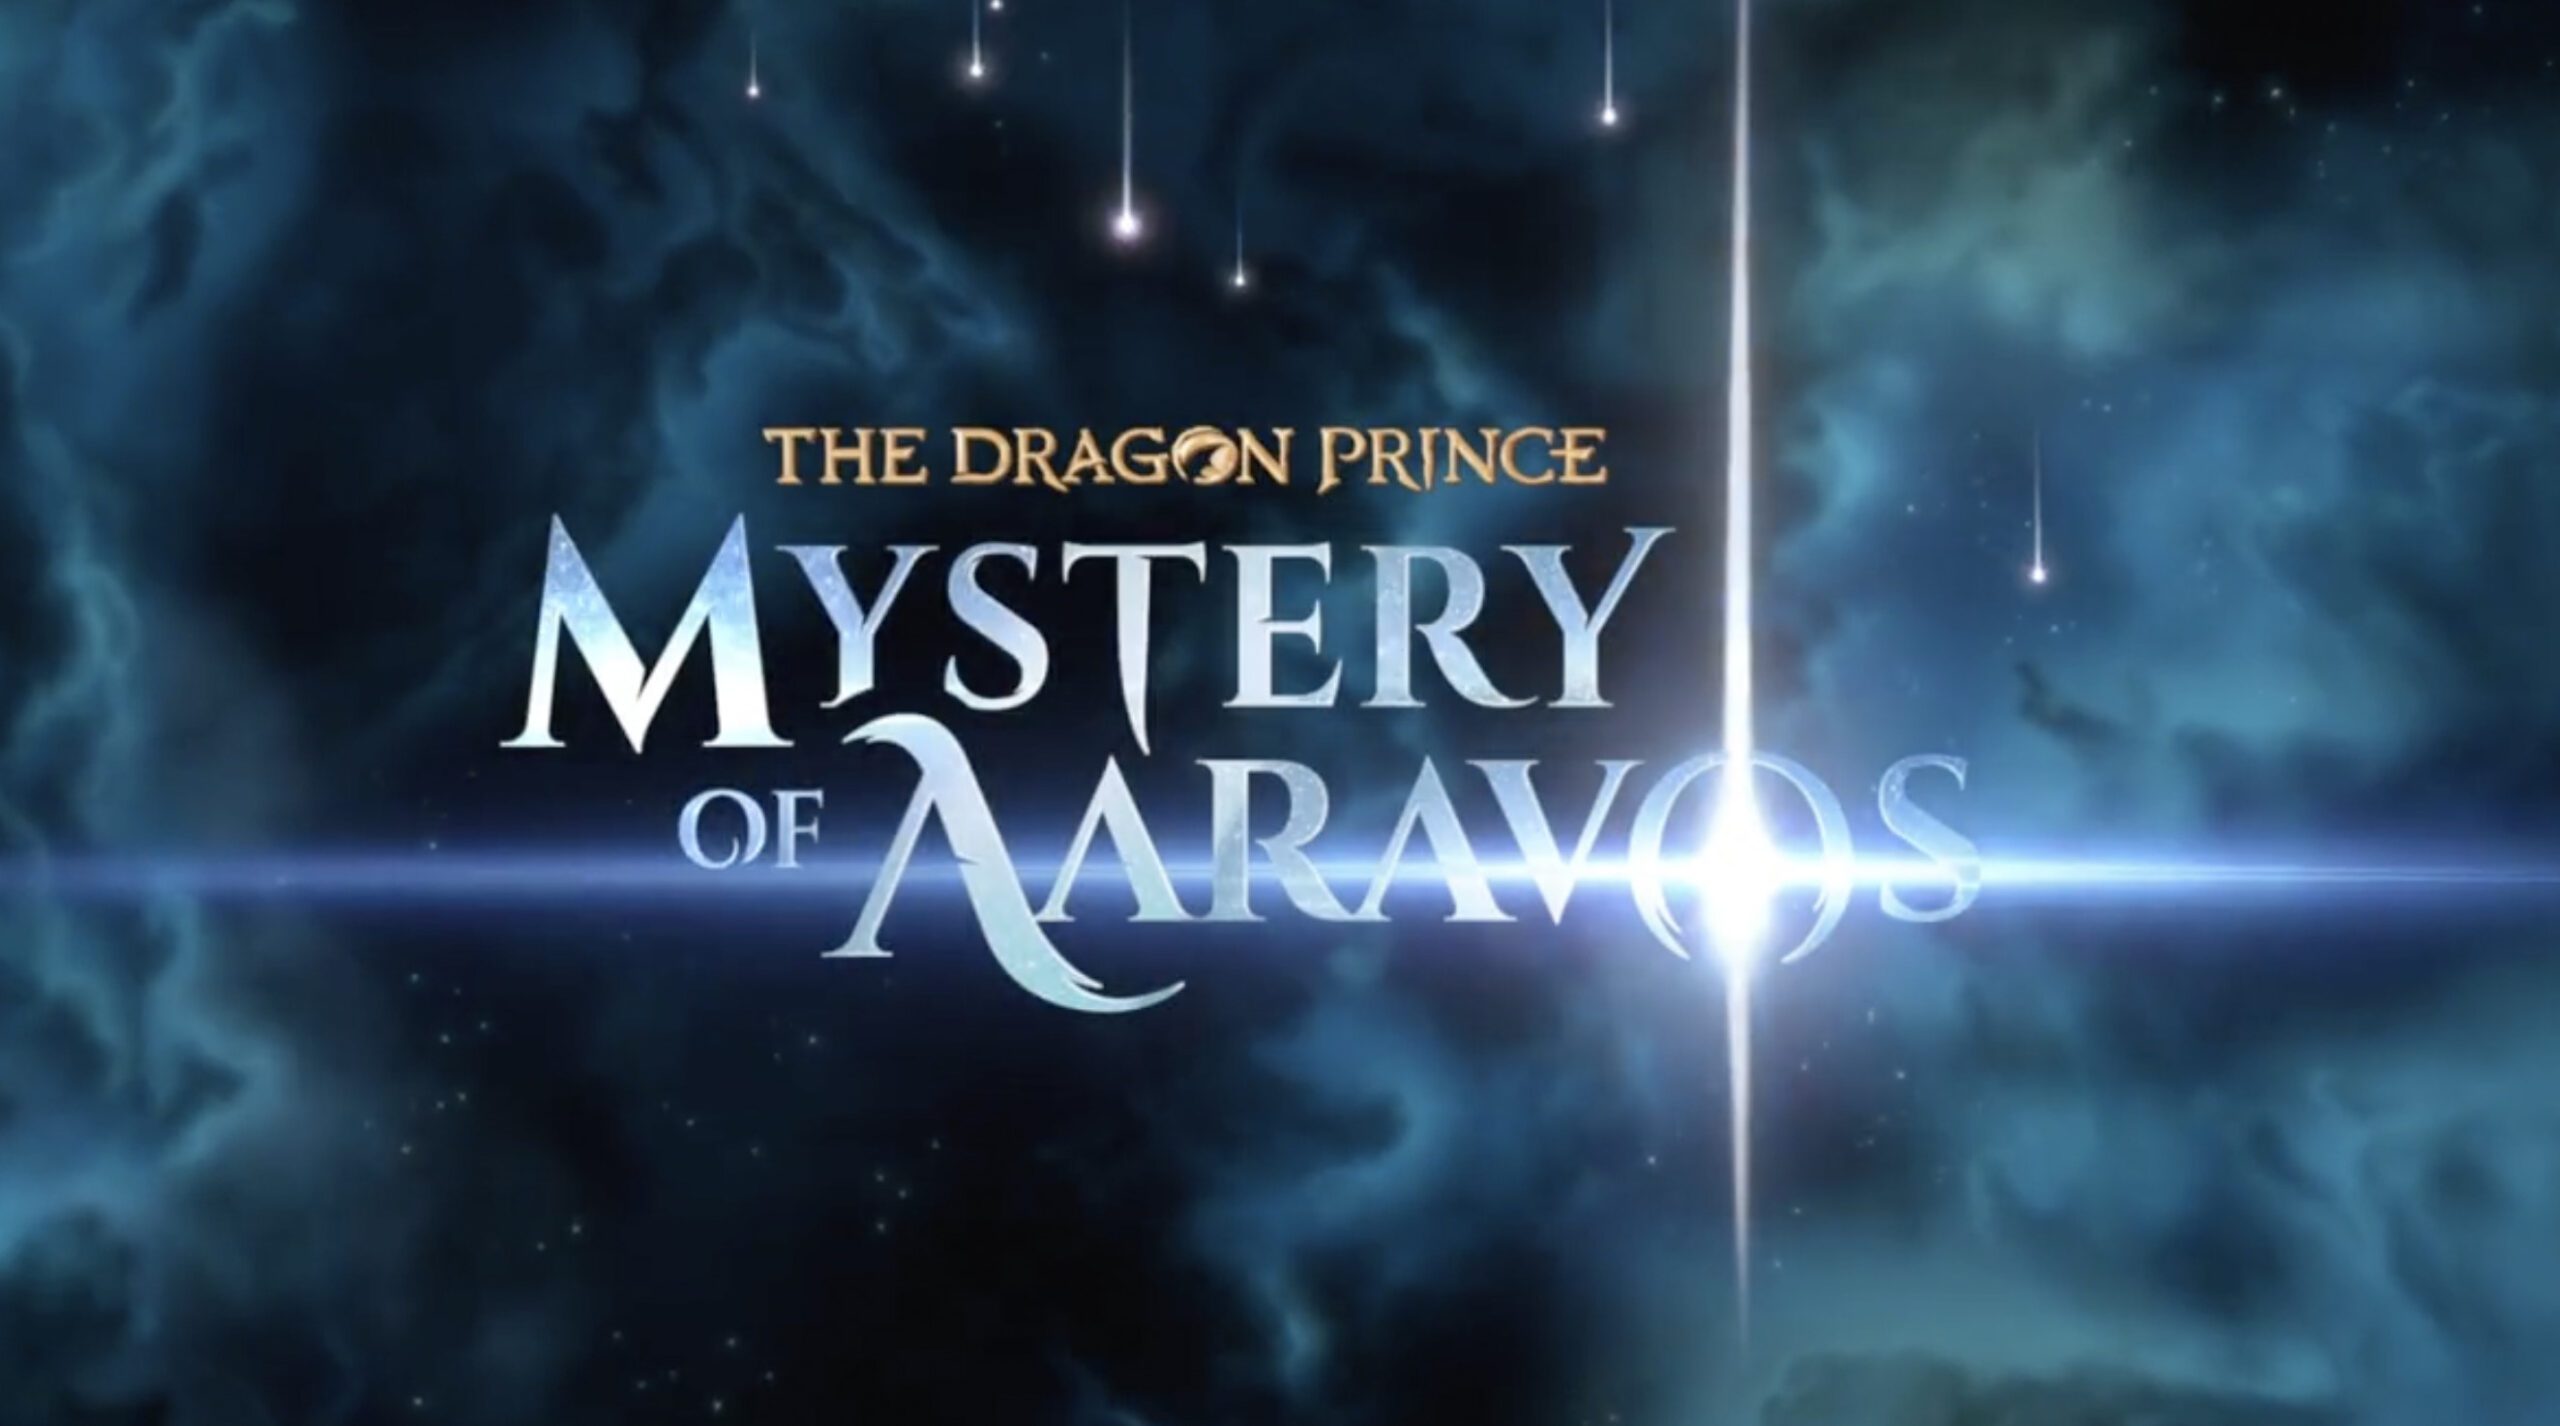 The Dragon Prince Season 4 Trailer Teases The Mystery Of Aaravos Geeks Gamers